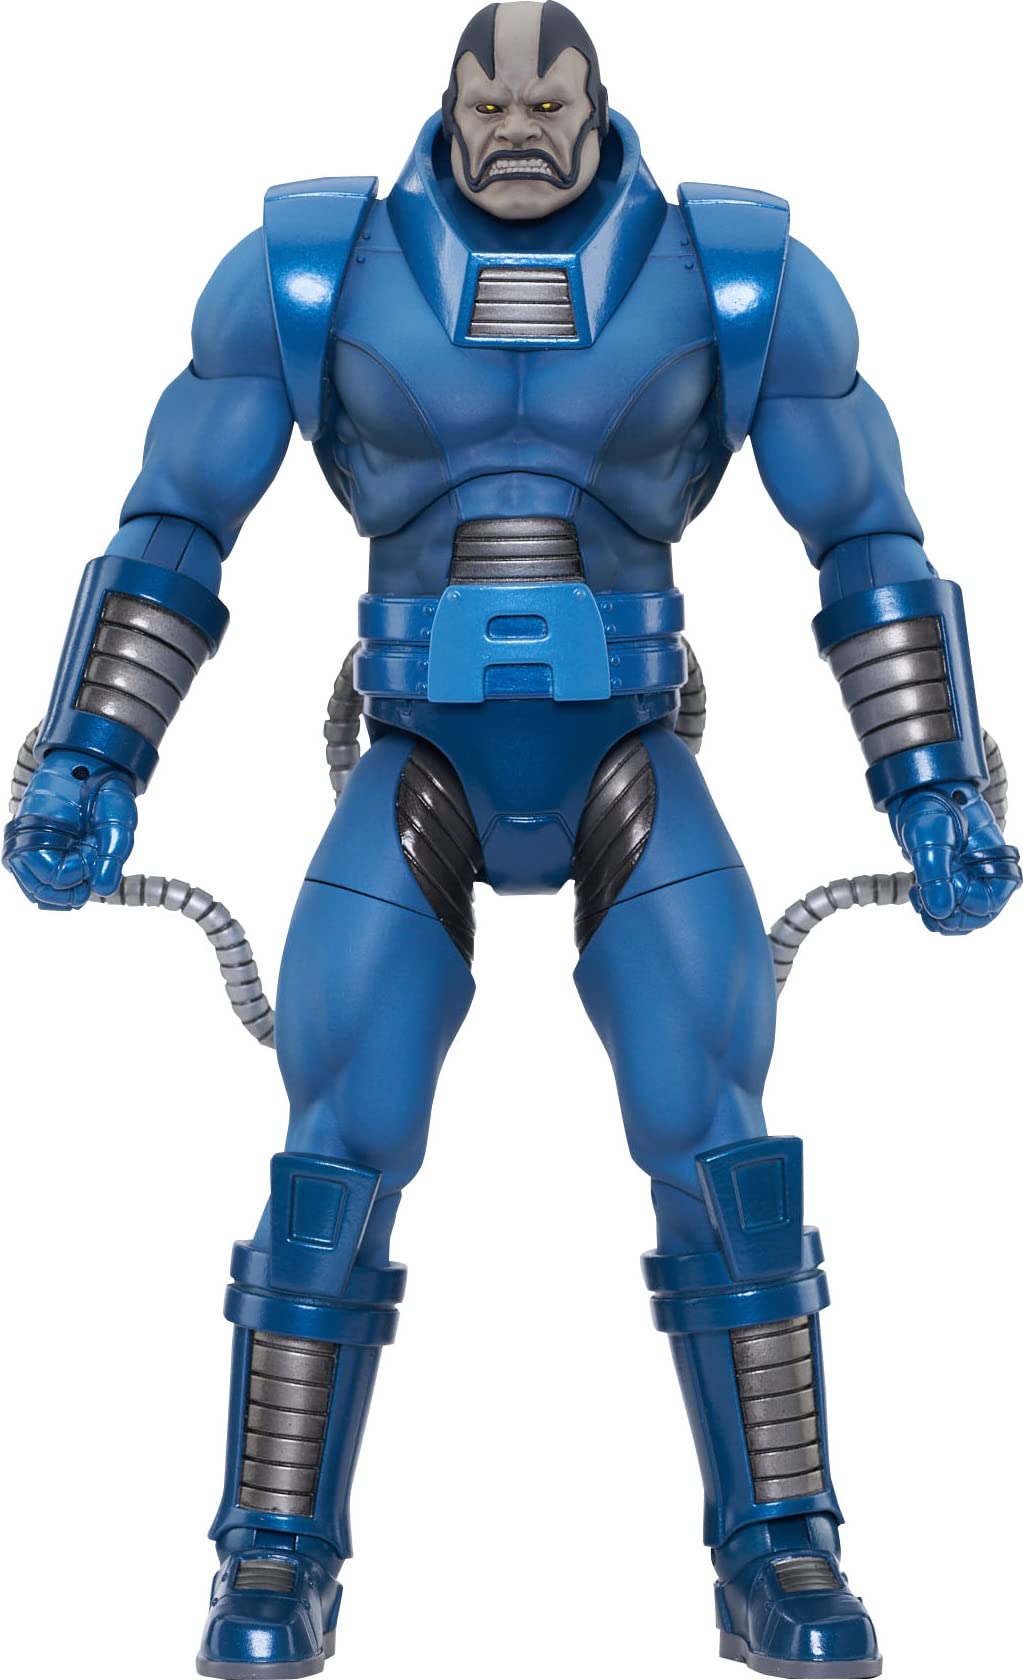 DIAMOND SELECT TOYS Marvel Select Apocalypse Action Figure 8.5 inches